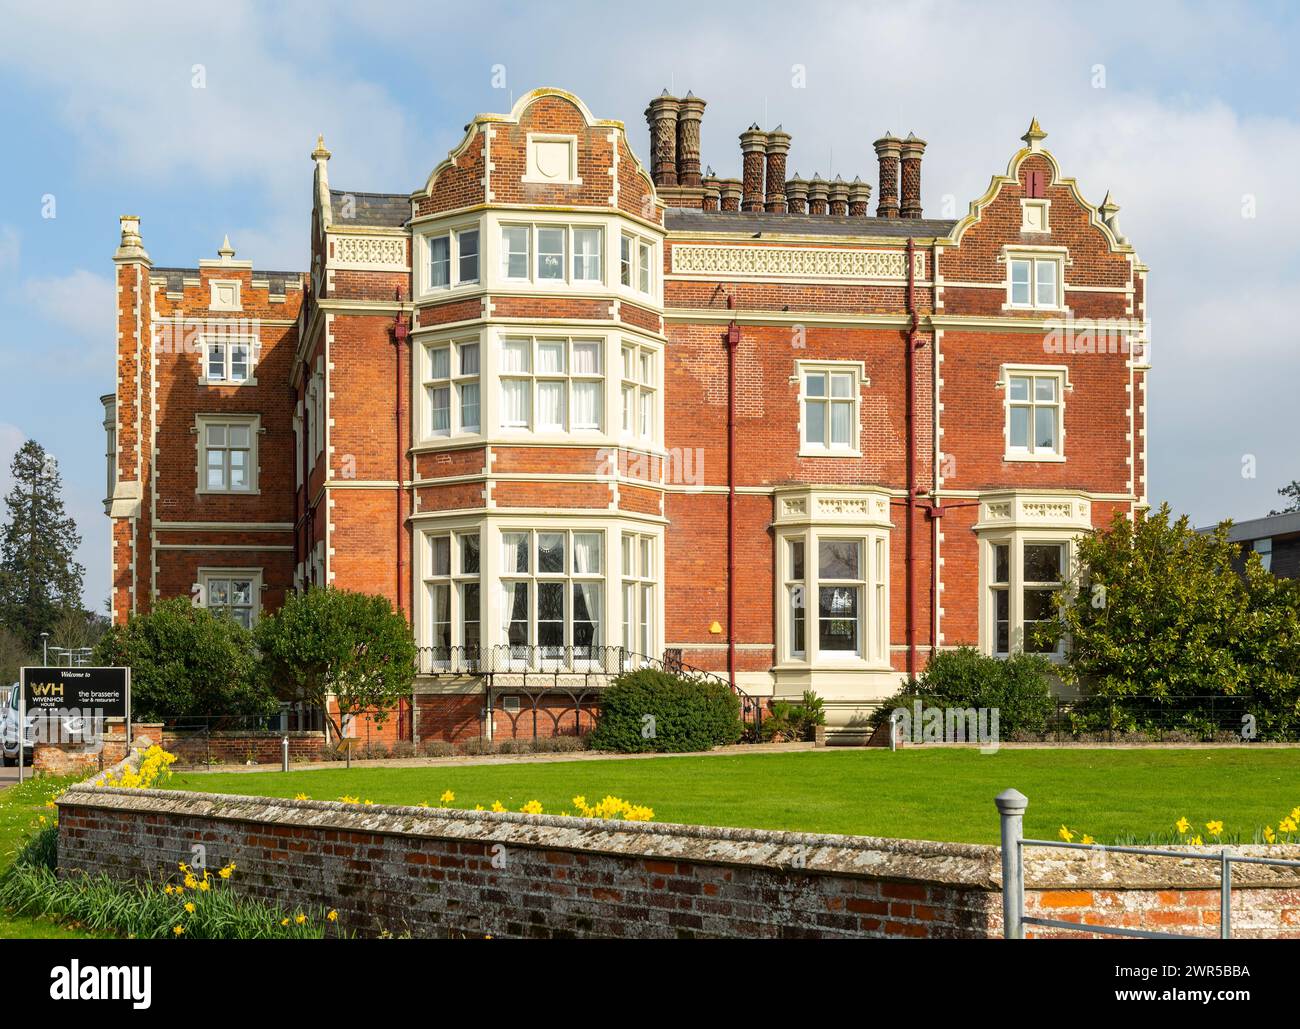 Wivenhoe House hotel, University of Essex, Colchester, Essex, England, UK Stock Photo